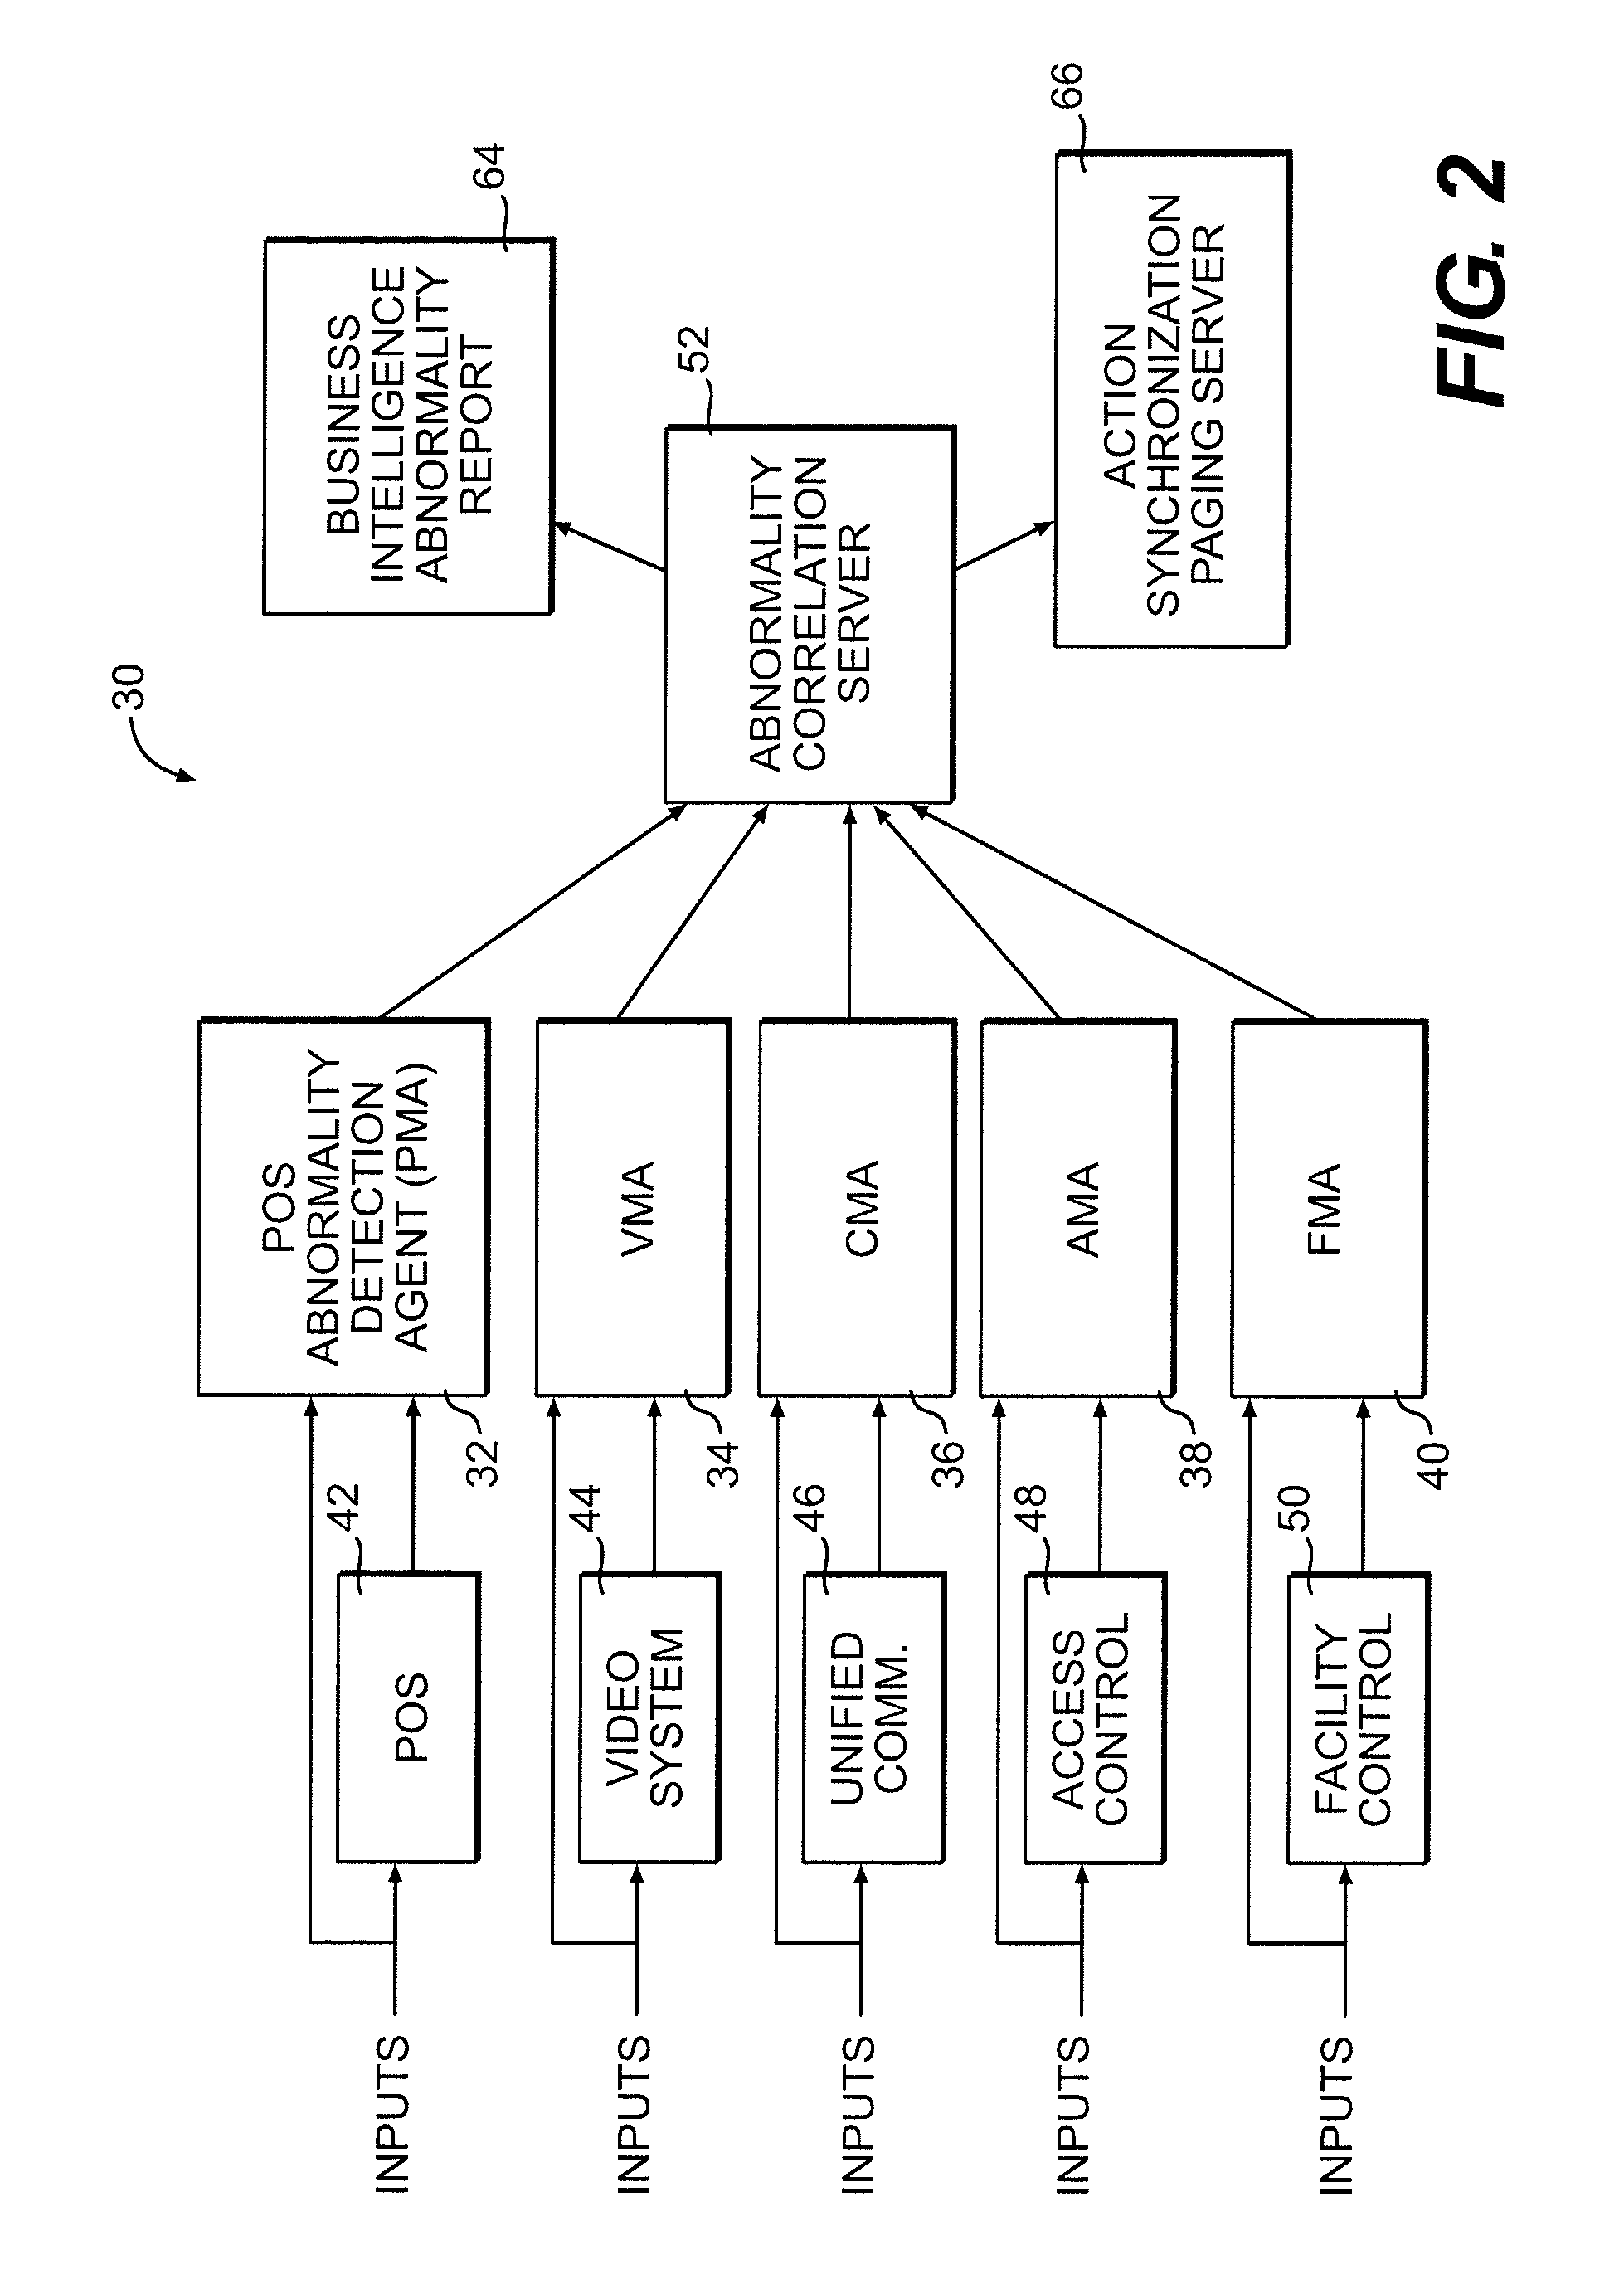 System and method for improving site operations by detecting abnormalities